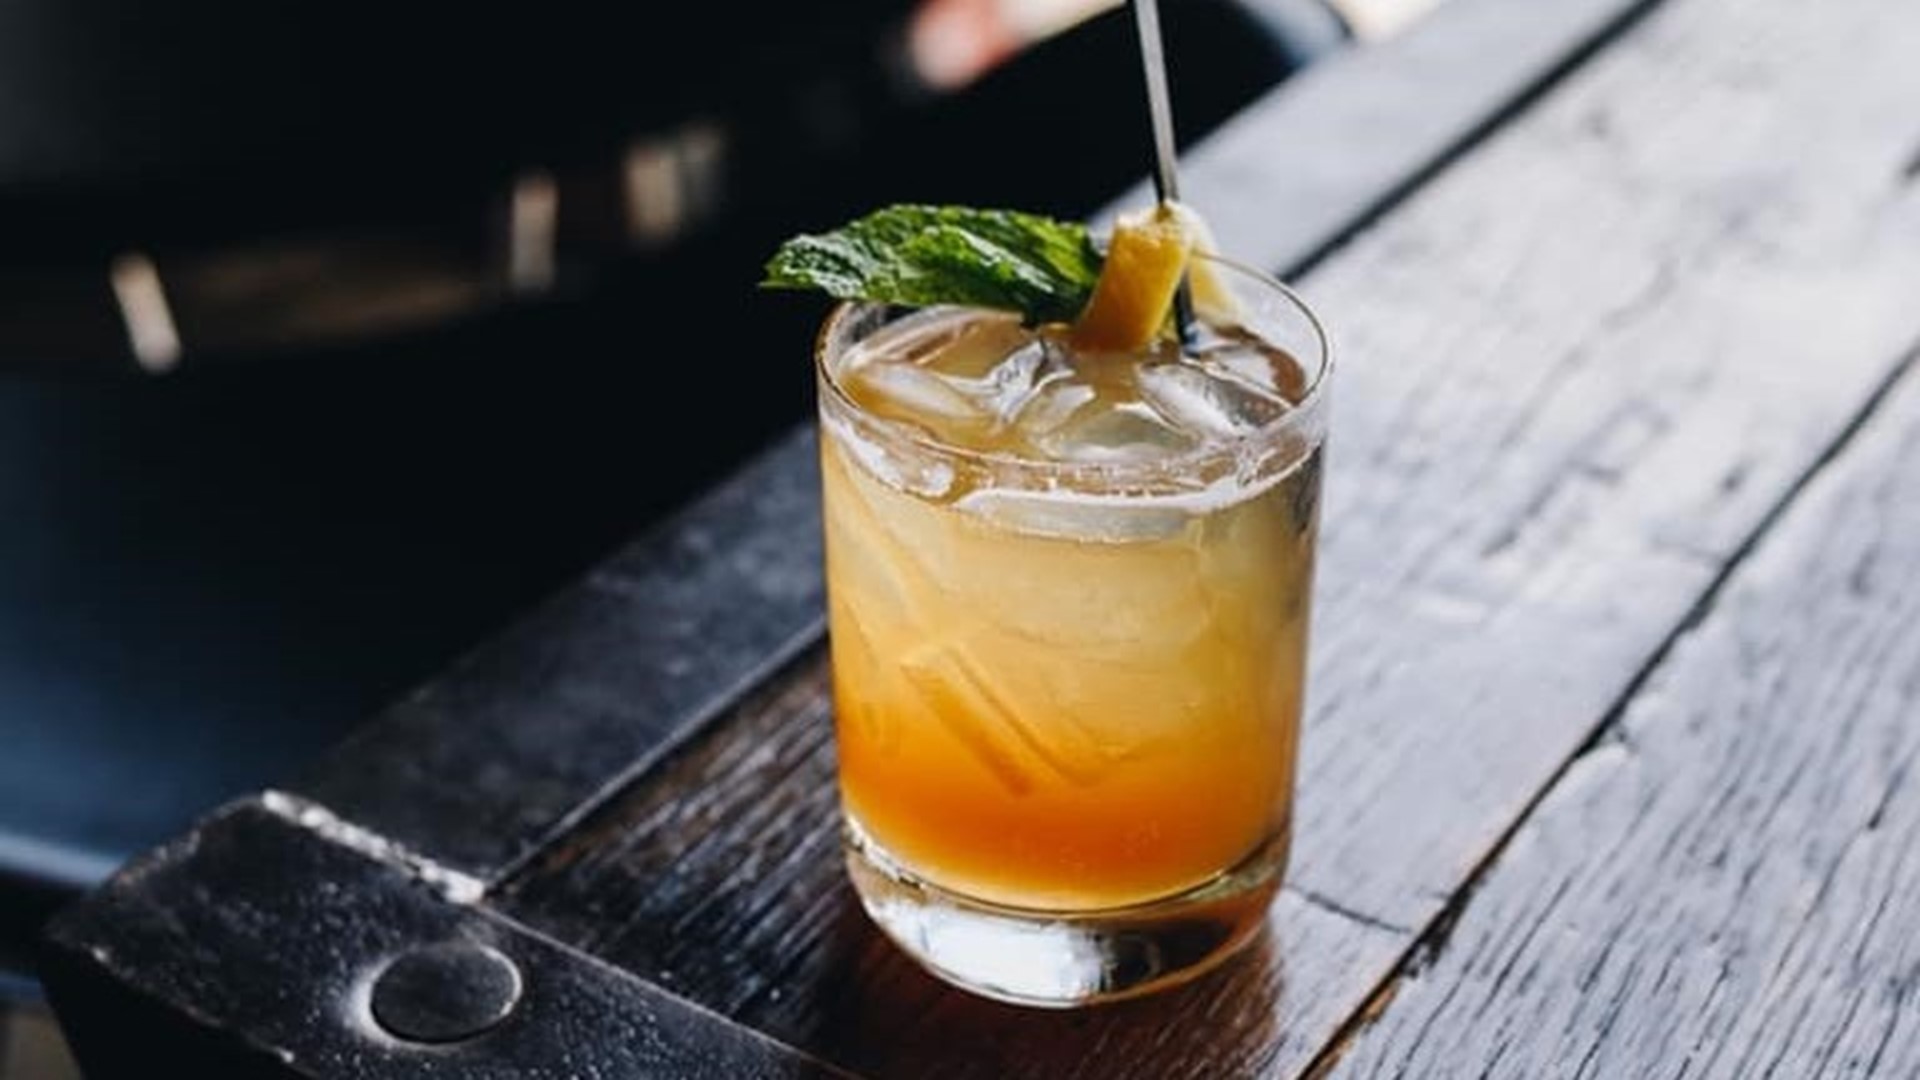 Irish Whiskey ambassador, Derek King, shares three honey cocktails and Powers Whiskey's mission to support local beekeepers